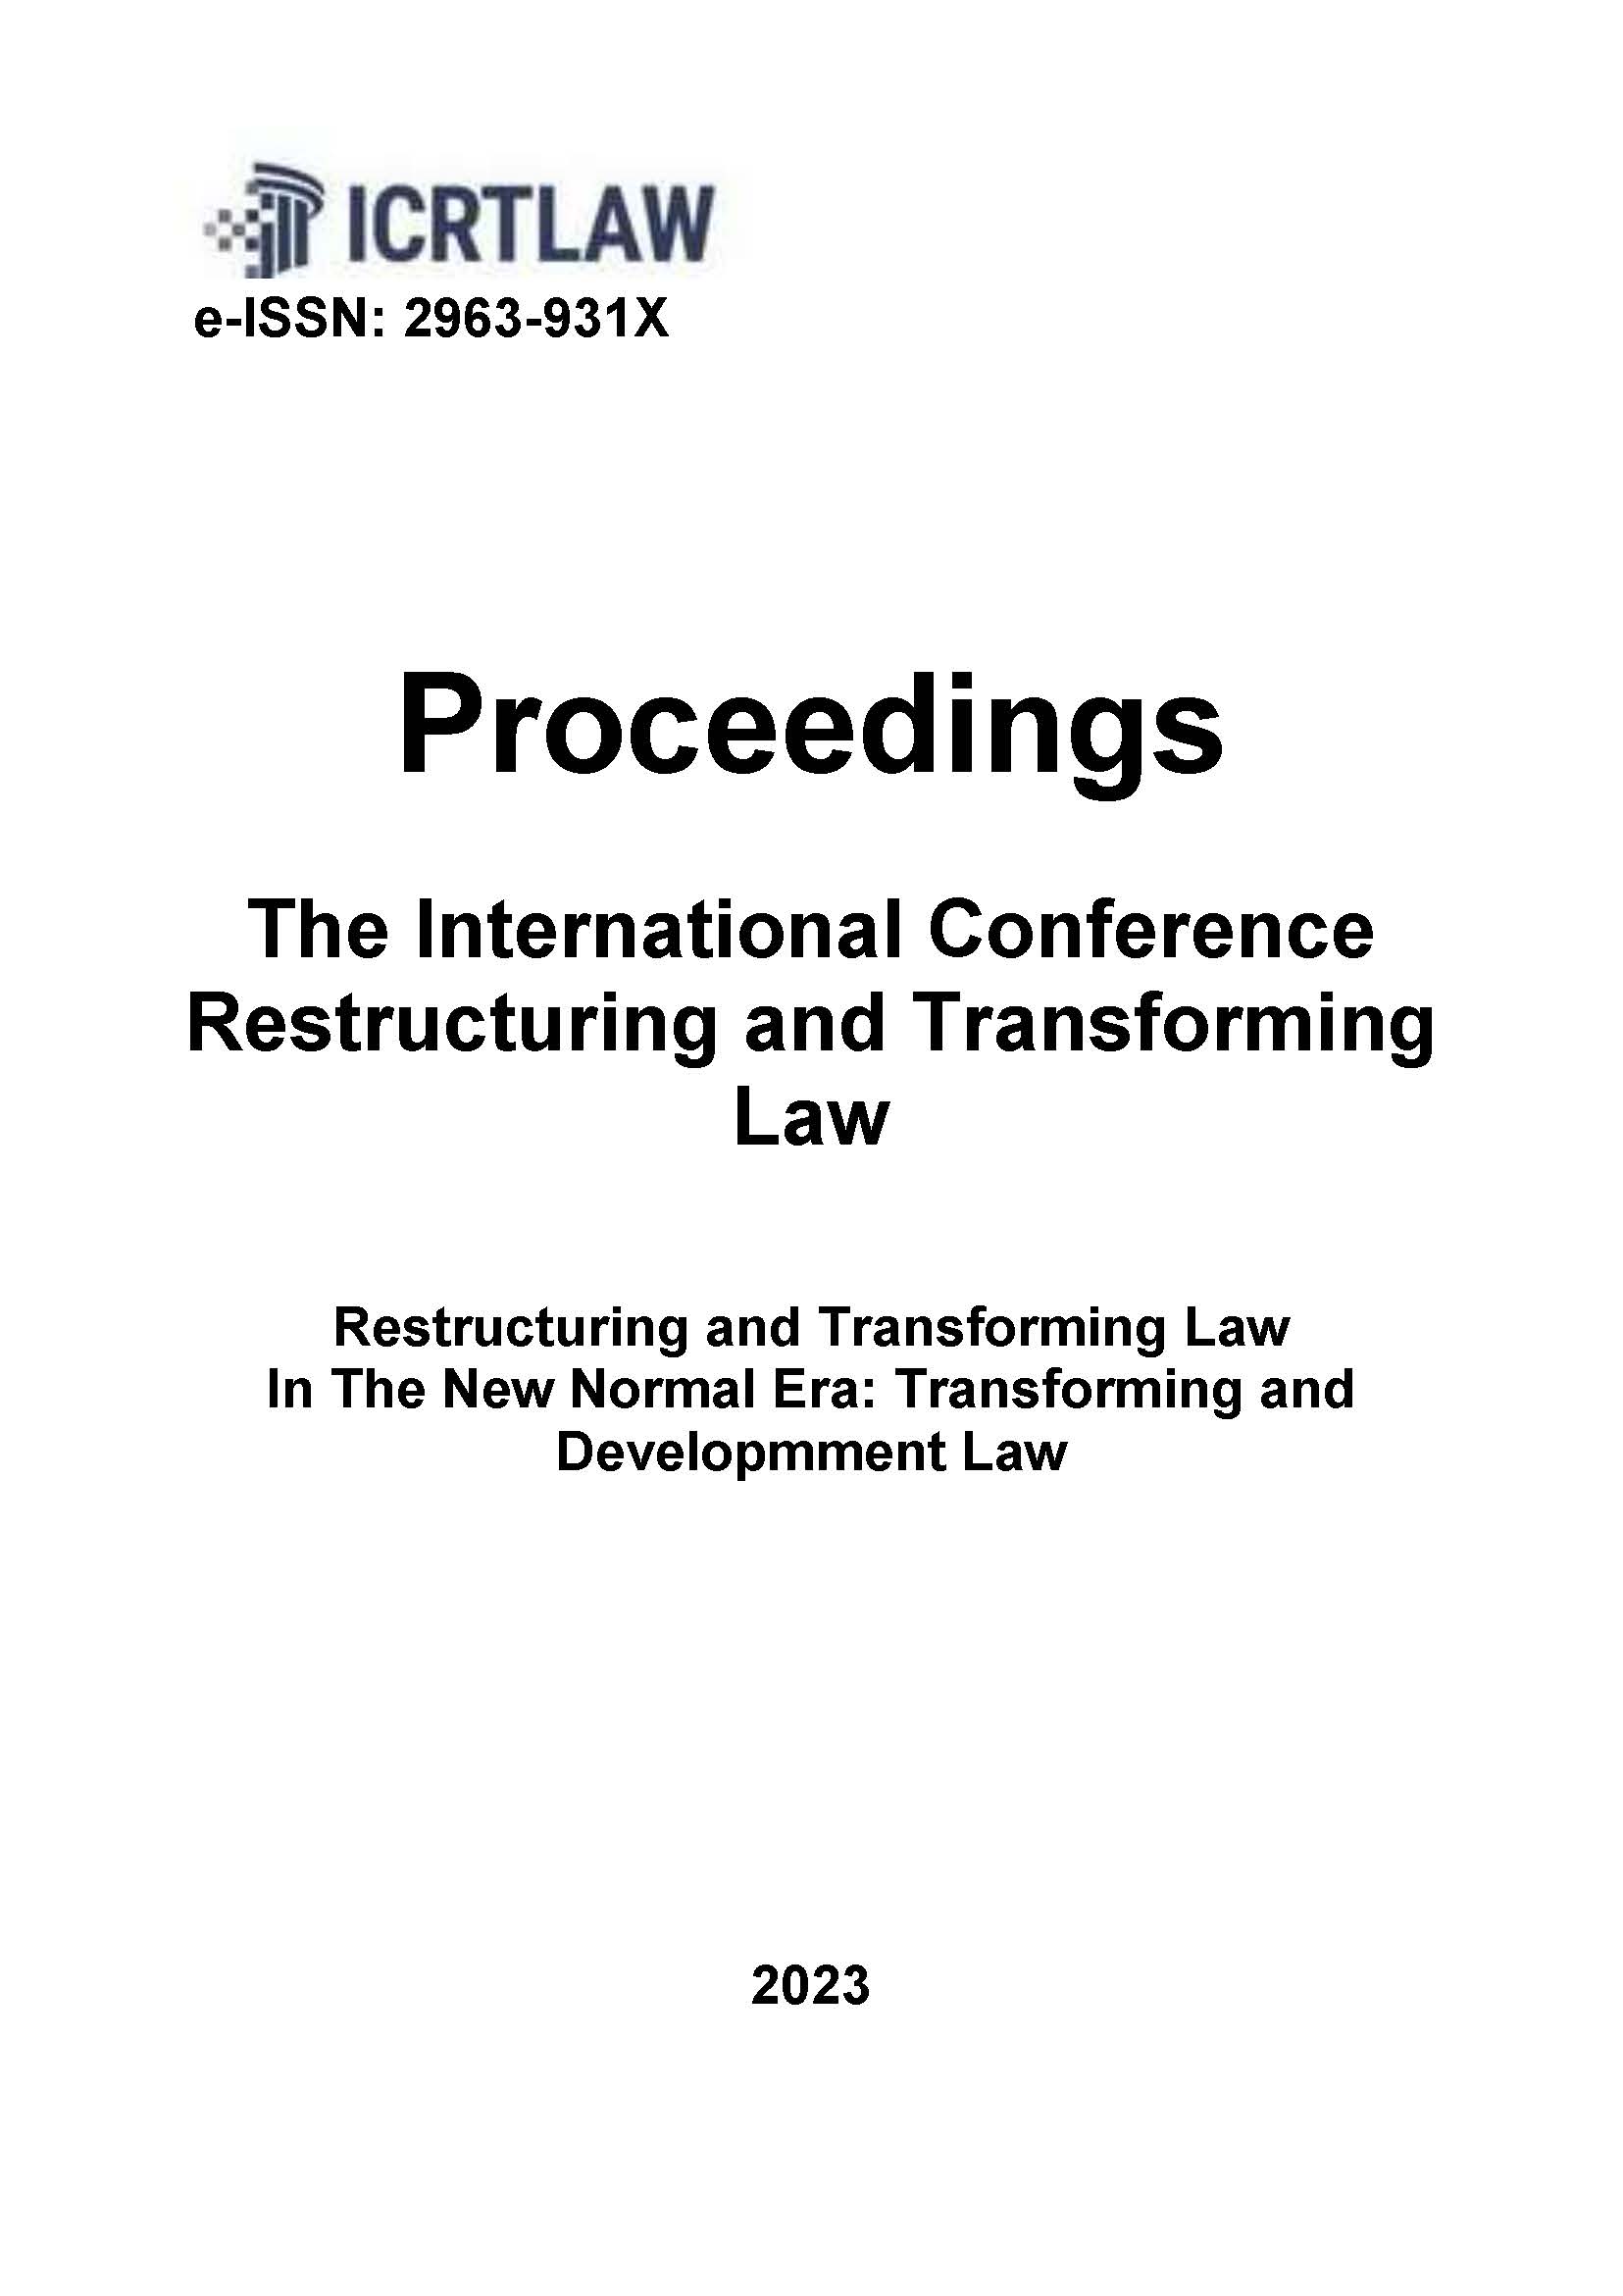 					View 2023: Proceeding International Conference Restructuring and Transforming Law
				